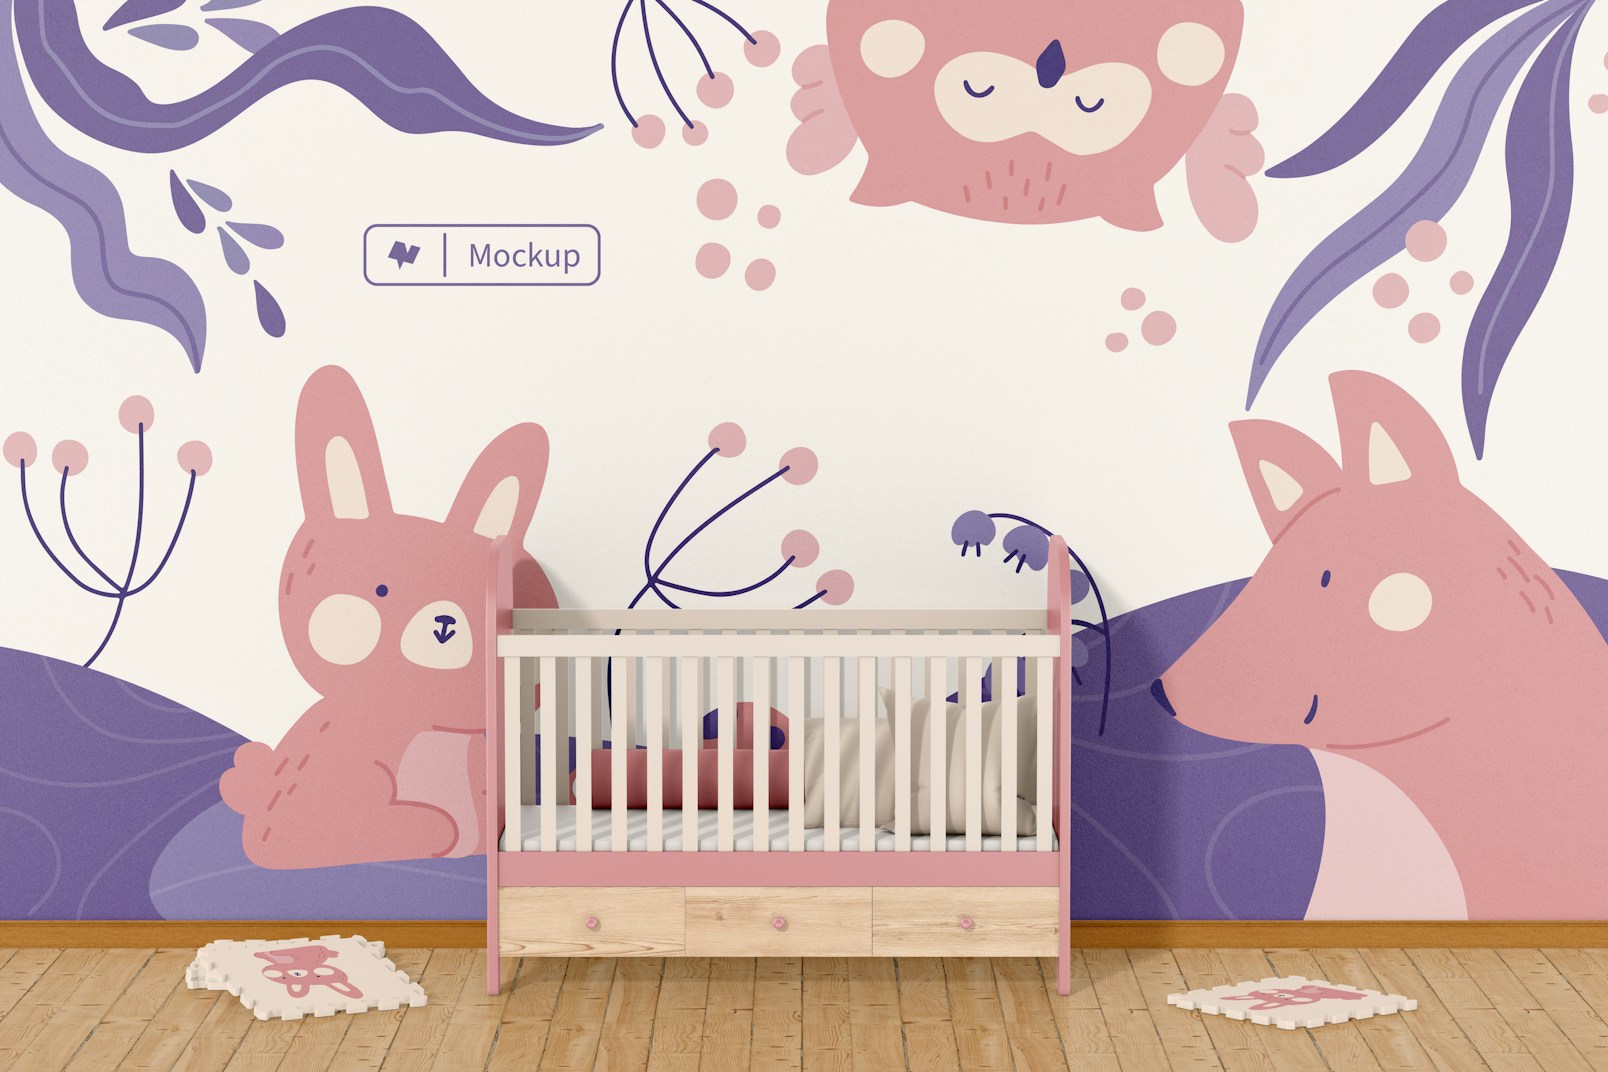 Baby Room Wall with Crib Mockup, Front View